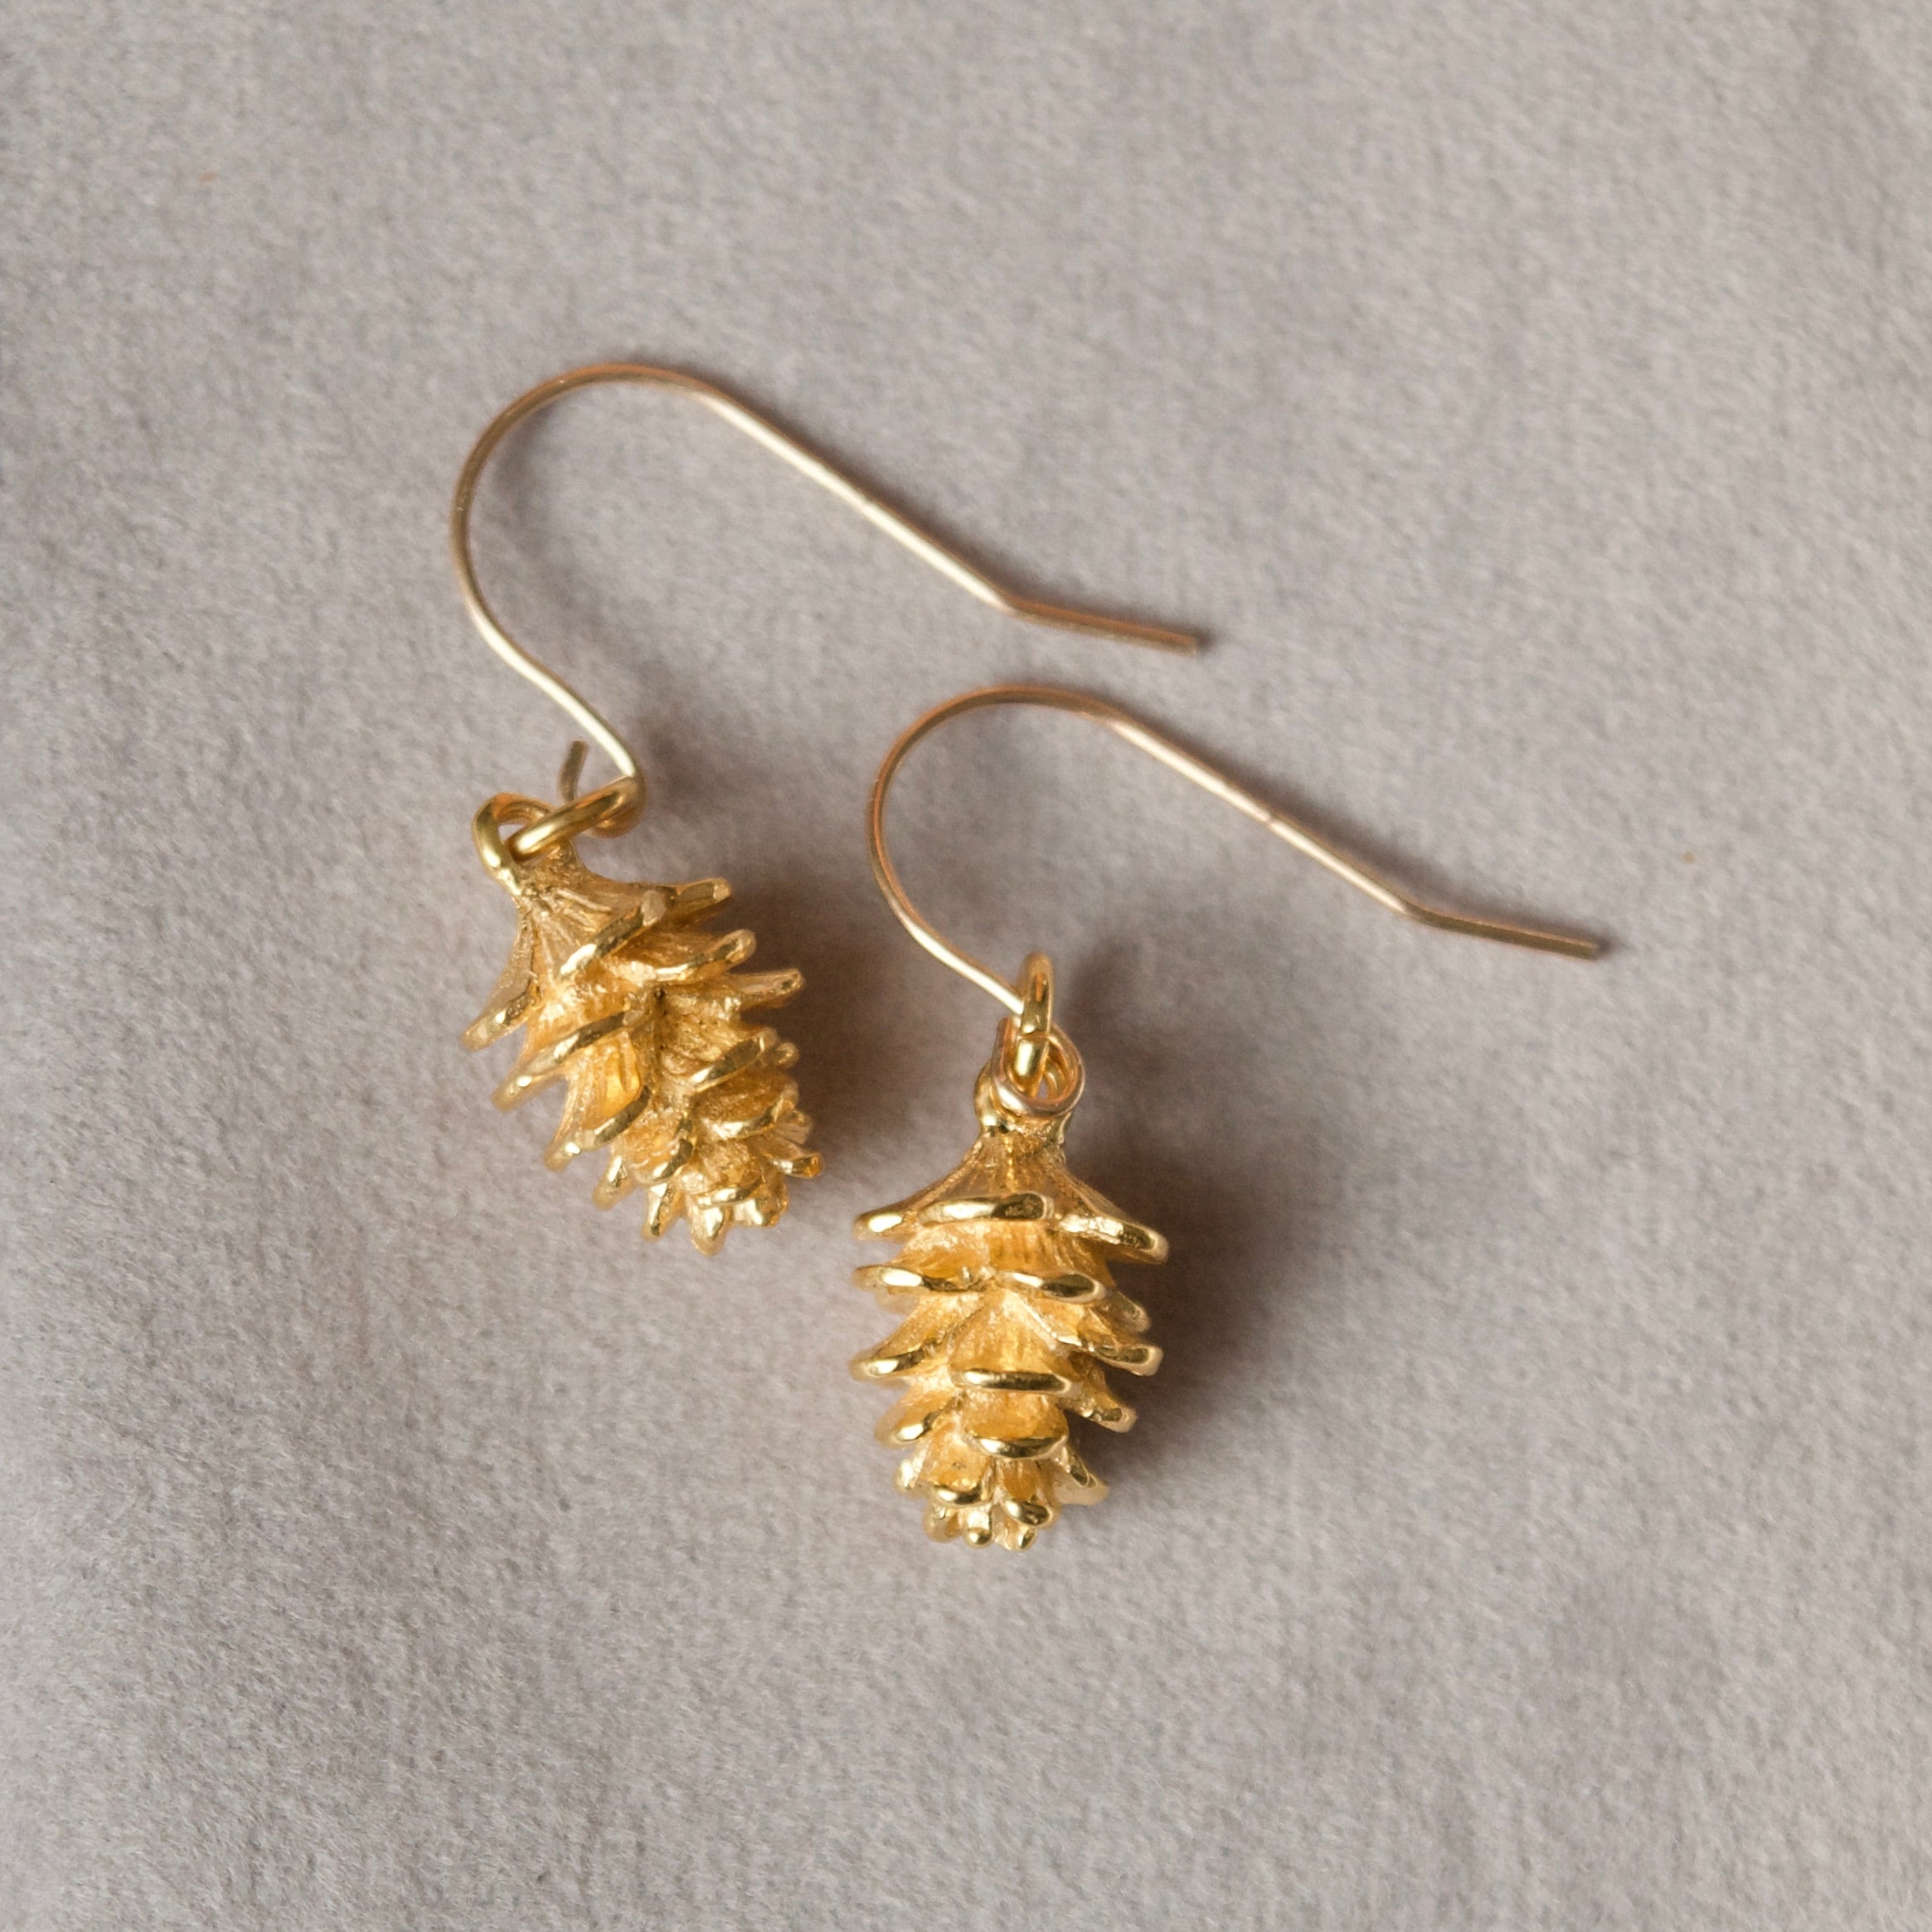 Tiny Pinecone Earrings in Yellow Gold